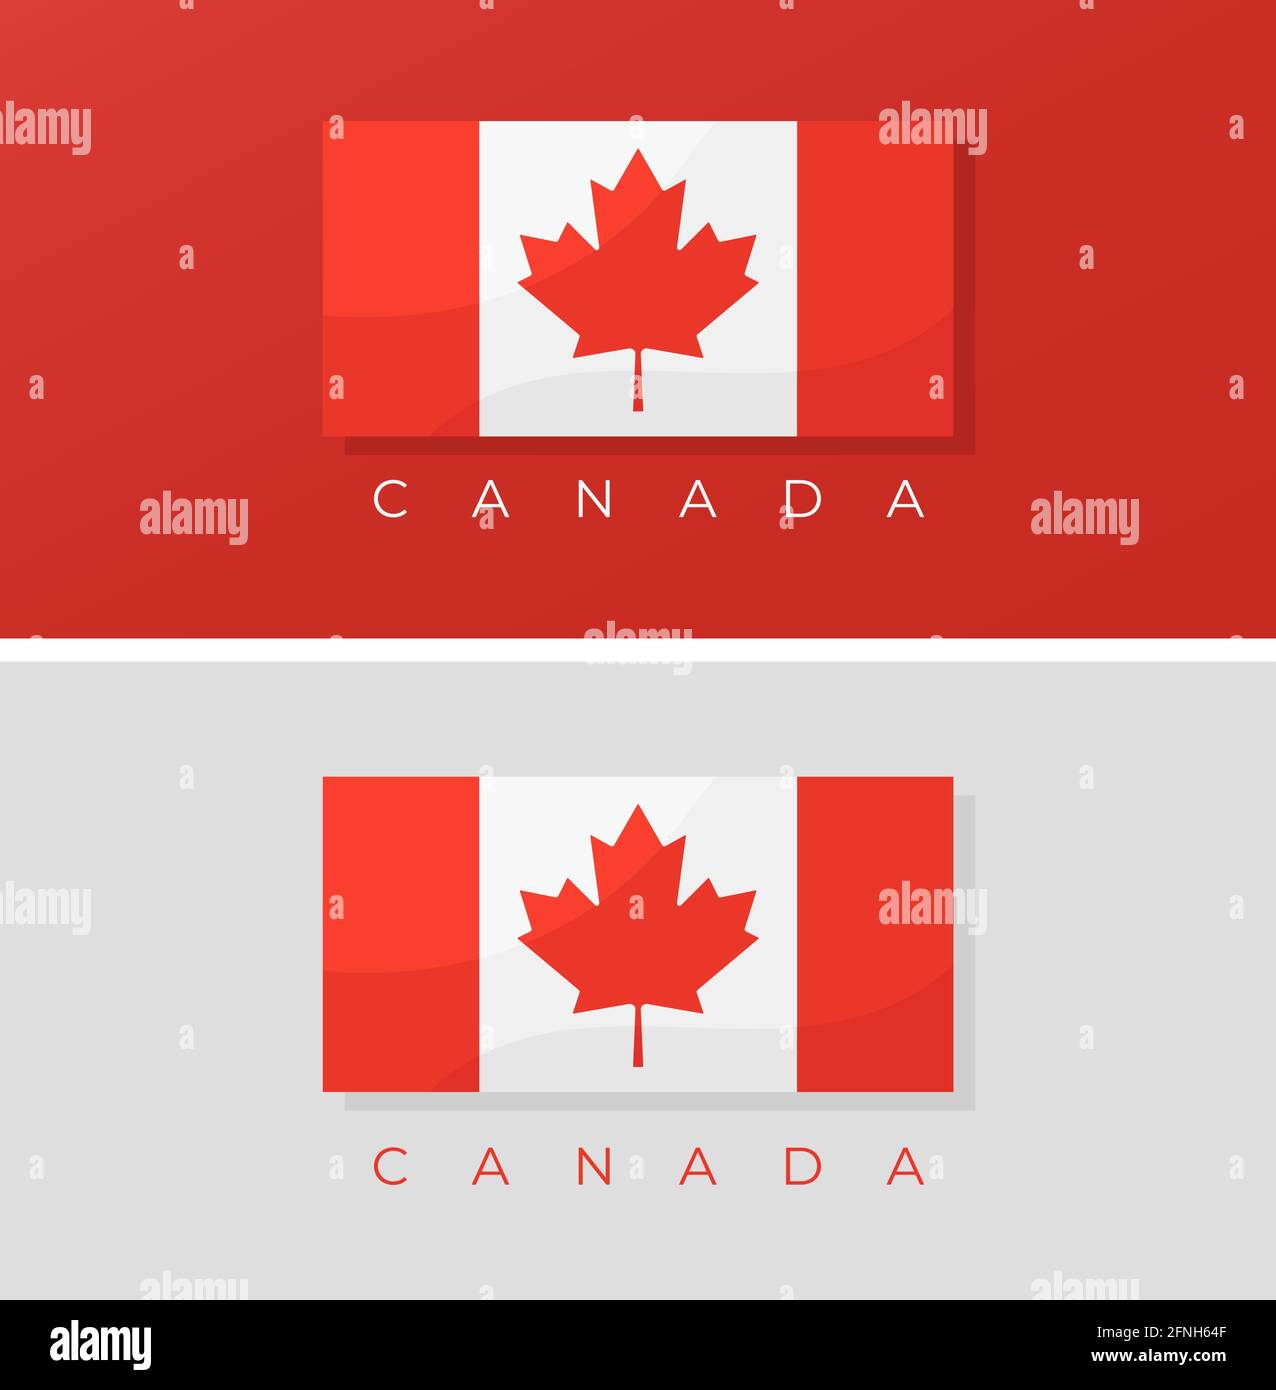 Canada flag isolated on red and white background. Vector illustration Stock Vector